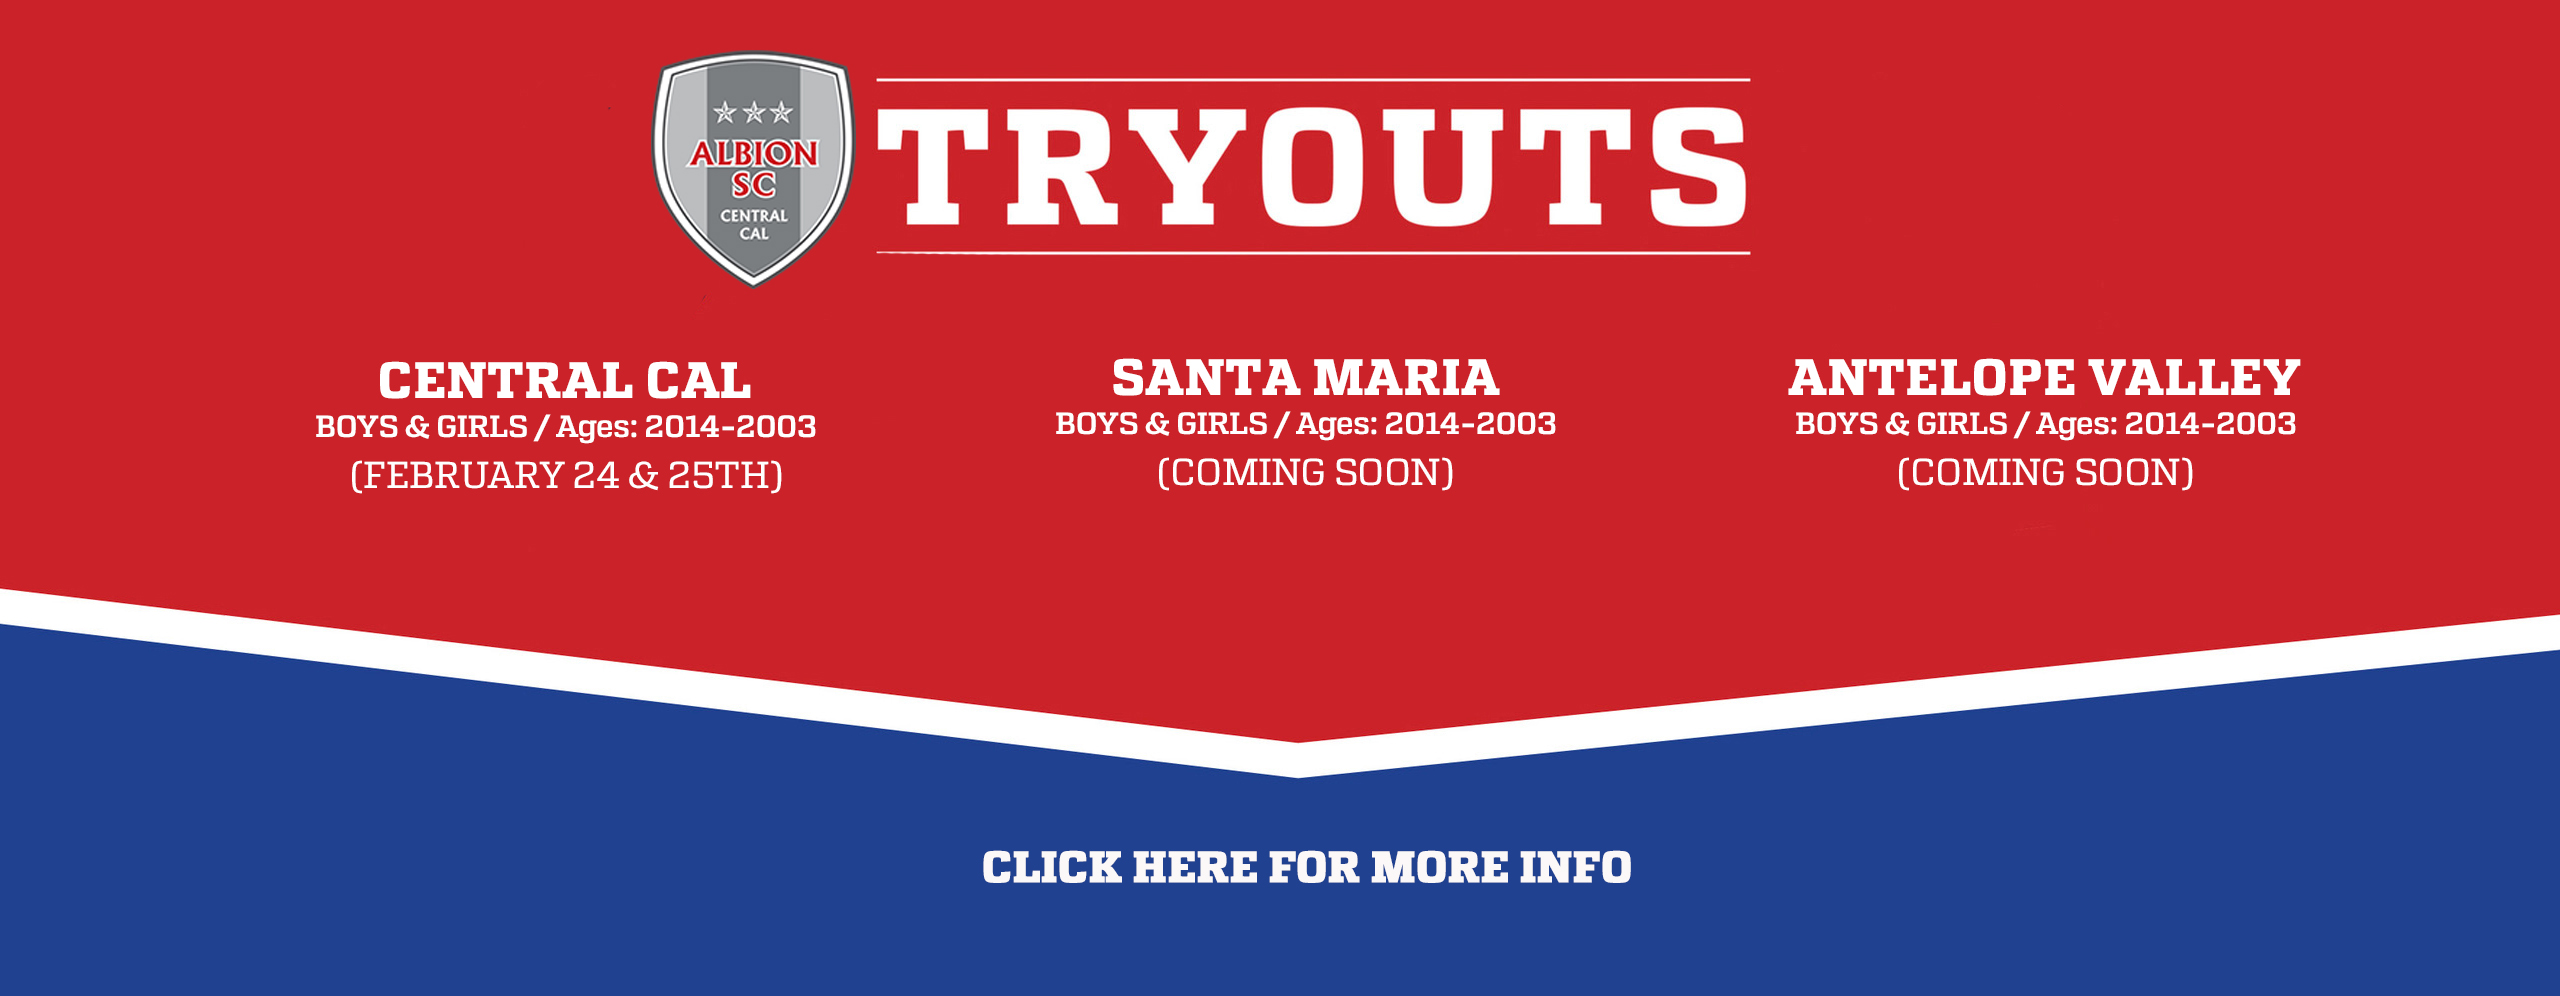 ALBION SC Central Cal TRYOUTS